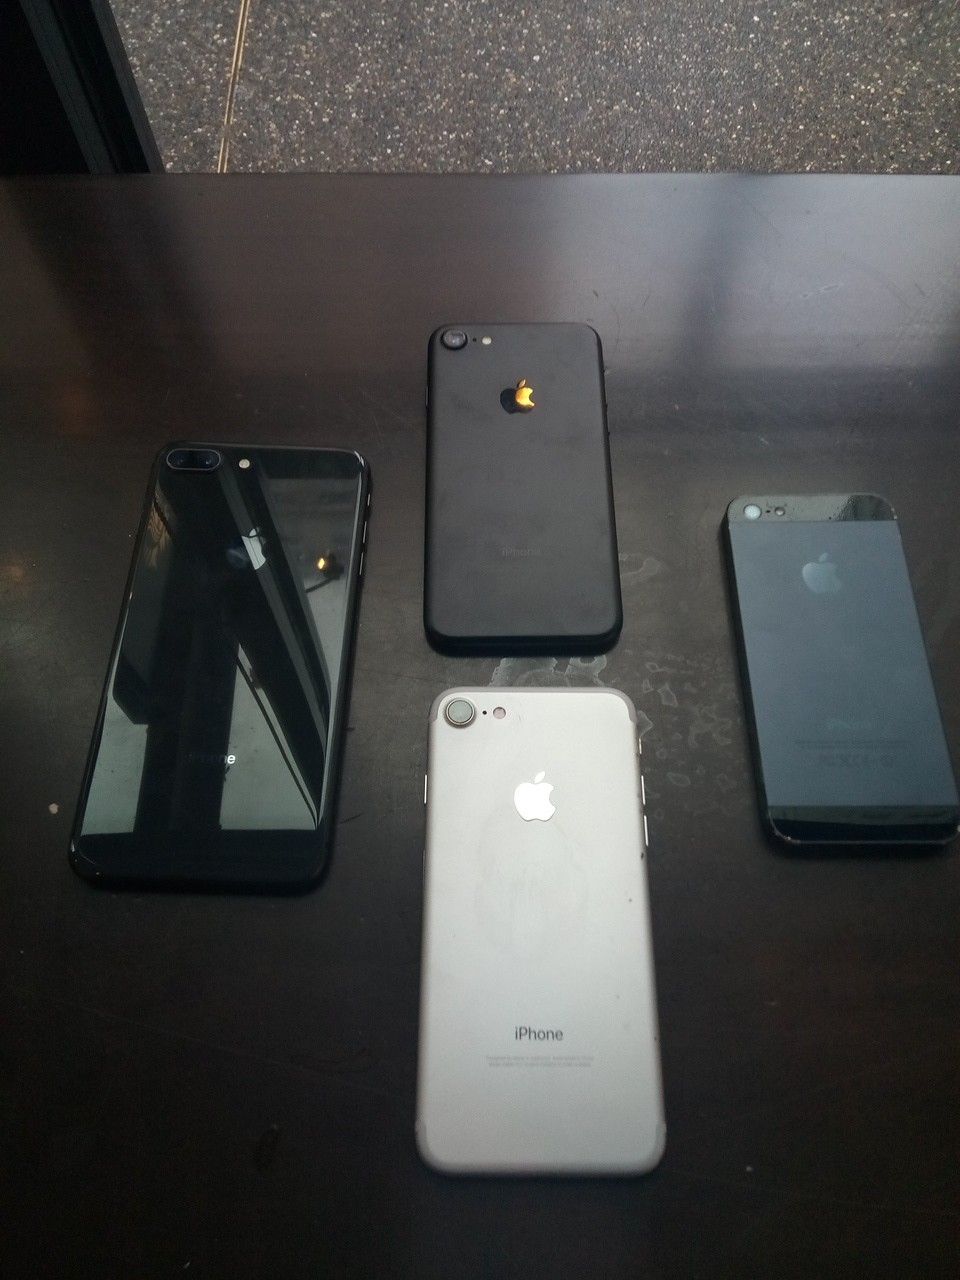 iPhone 8plus, 8, 8, 5 for sale (for parts)